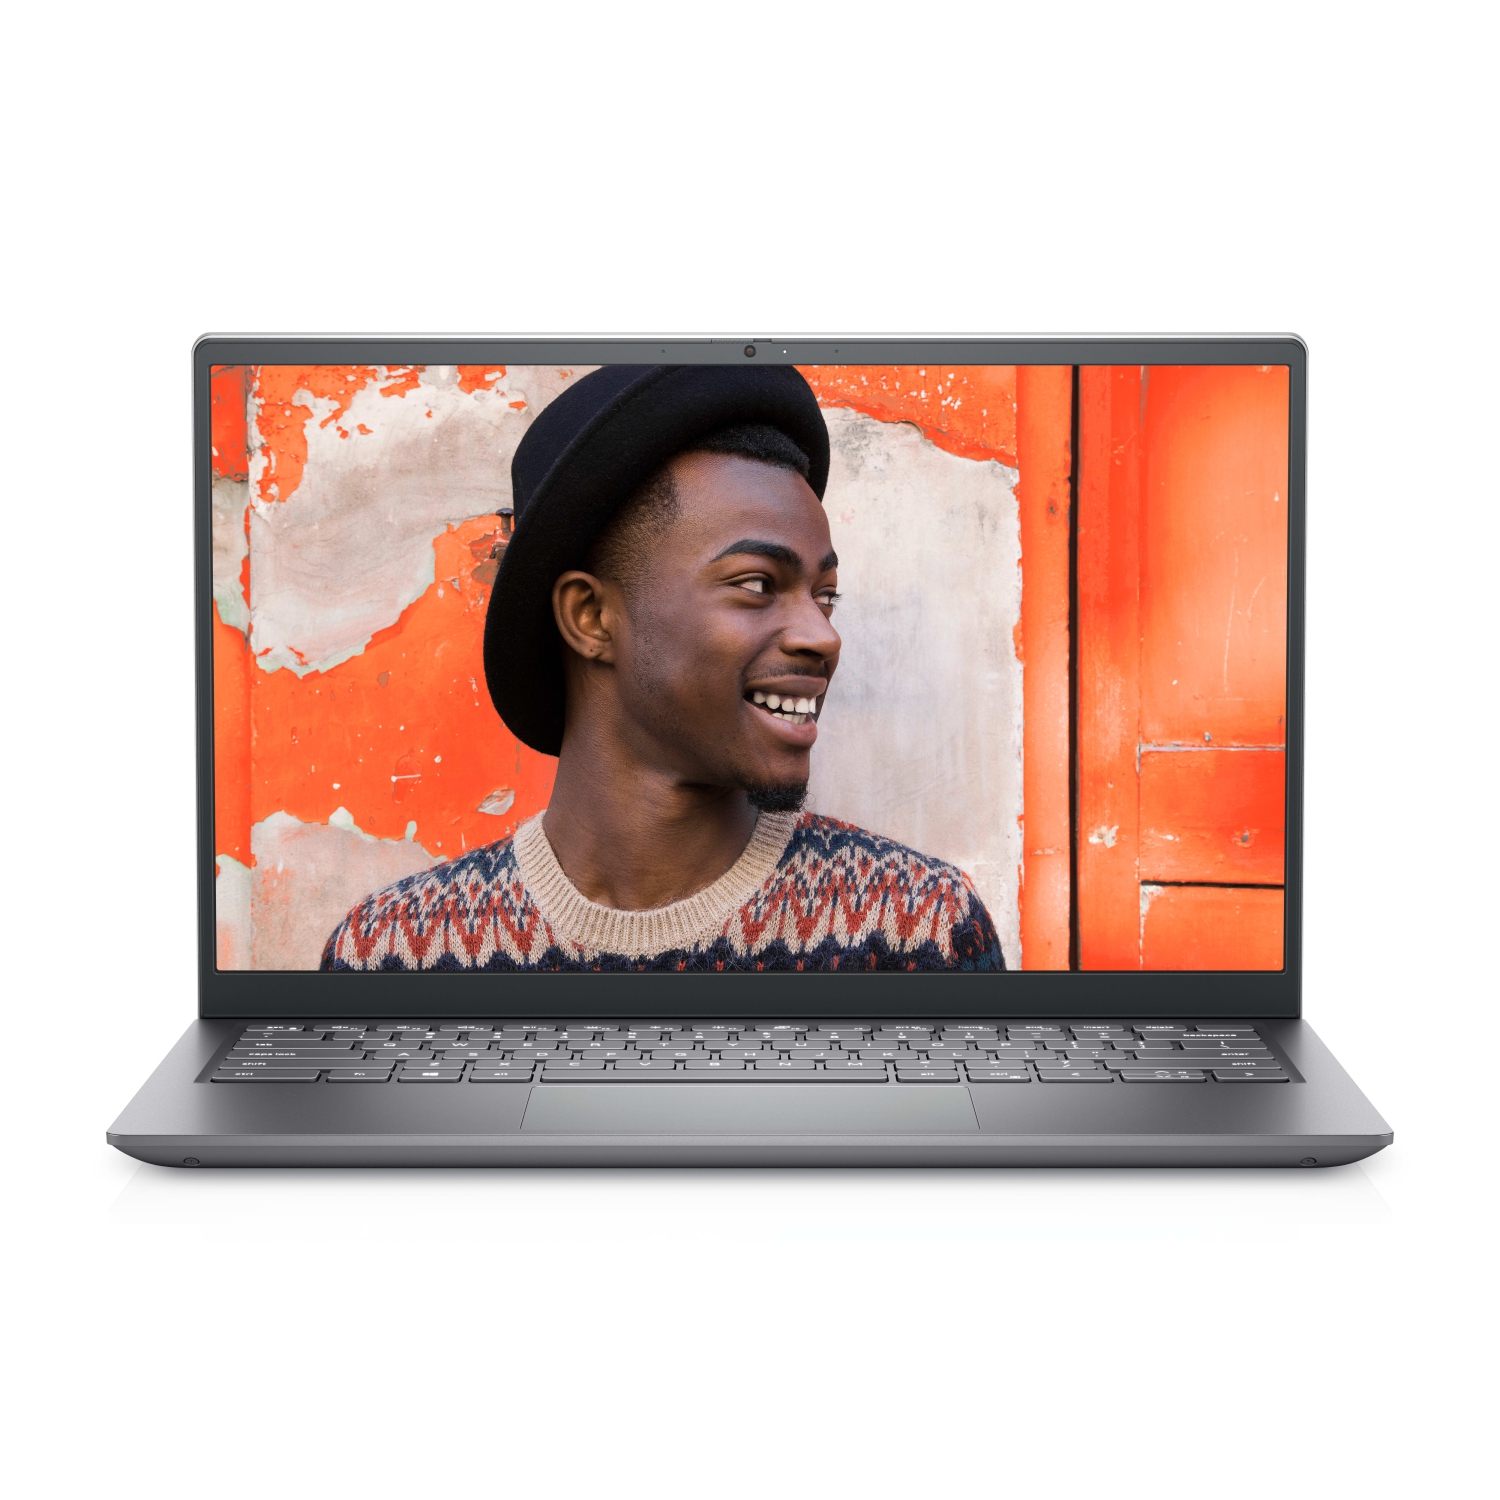 Refurbished (Excellent) – Dell Inspiron 5410 Laptop (2021) | 14" FHD | Core i5 - 256GB SSD - 12GB RAM | 4 Cores @ 4.4 GHz - 11th Gen CPU